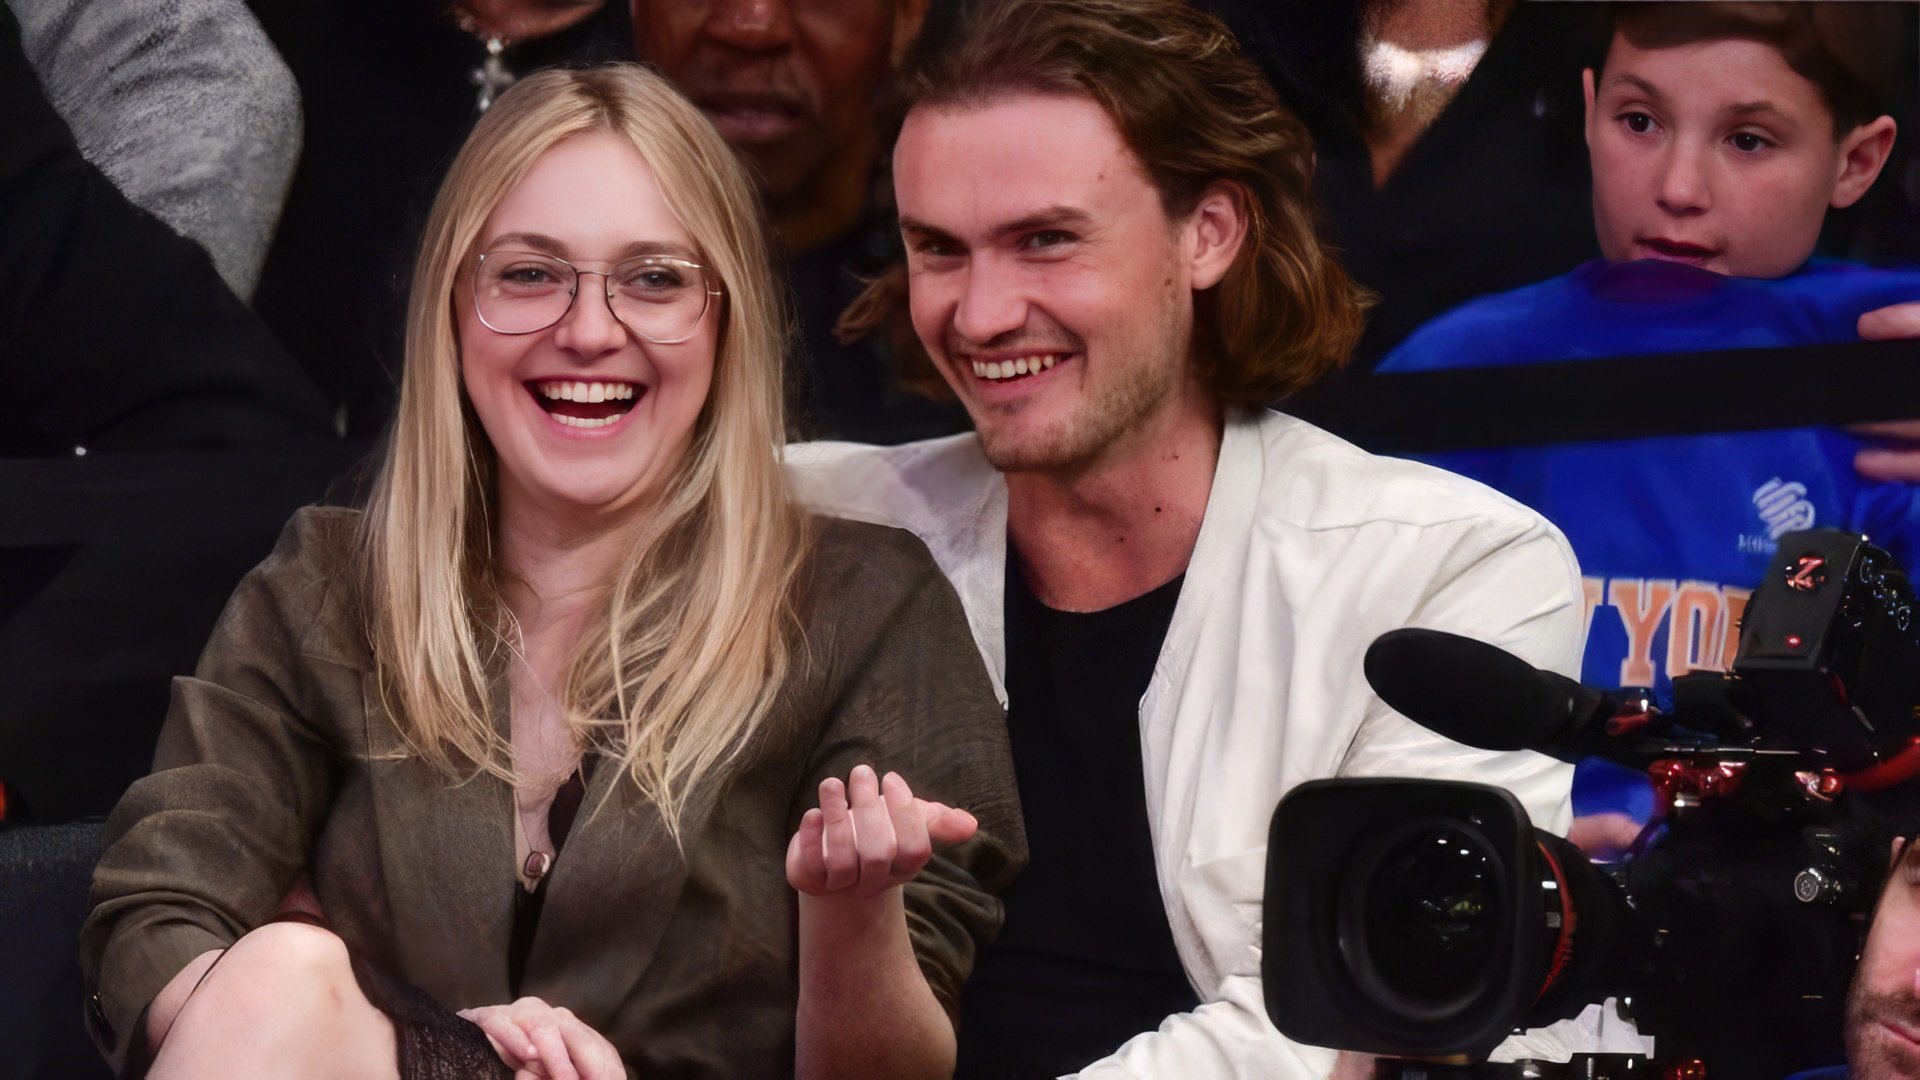 In the Picture: Dakota Fanning and Henry Fry